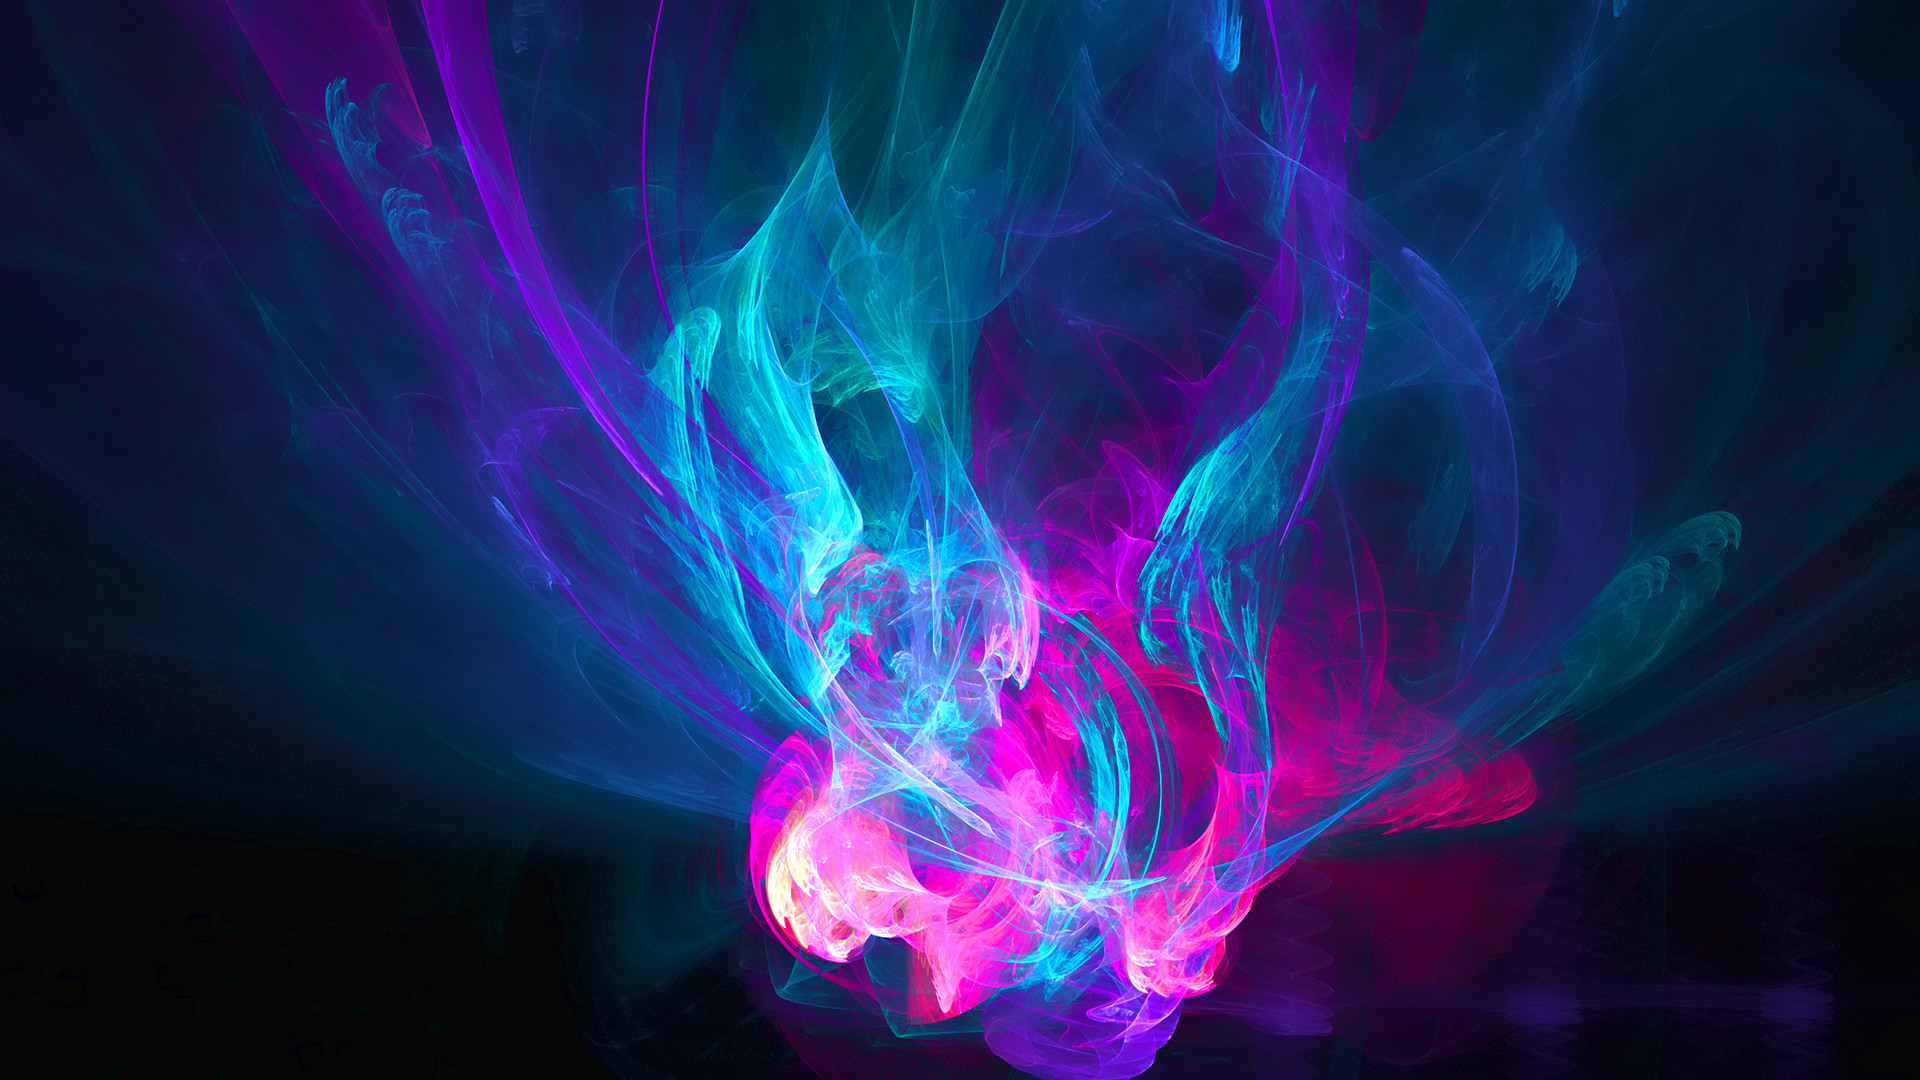 1920x1080 Blue Fire Wallpaper Hd Wallpapers Backgrounds Images Art Photos Cool  Abstract Purple